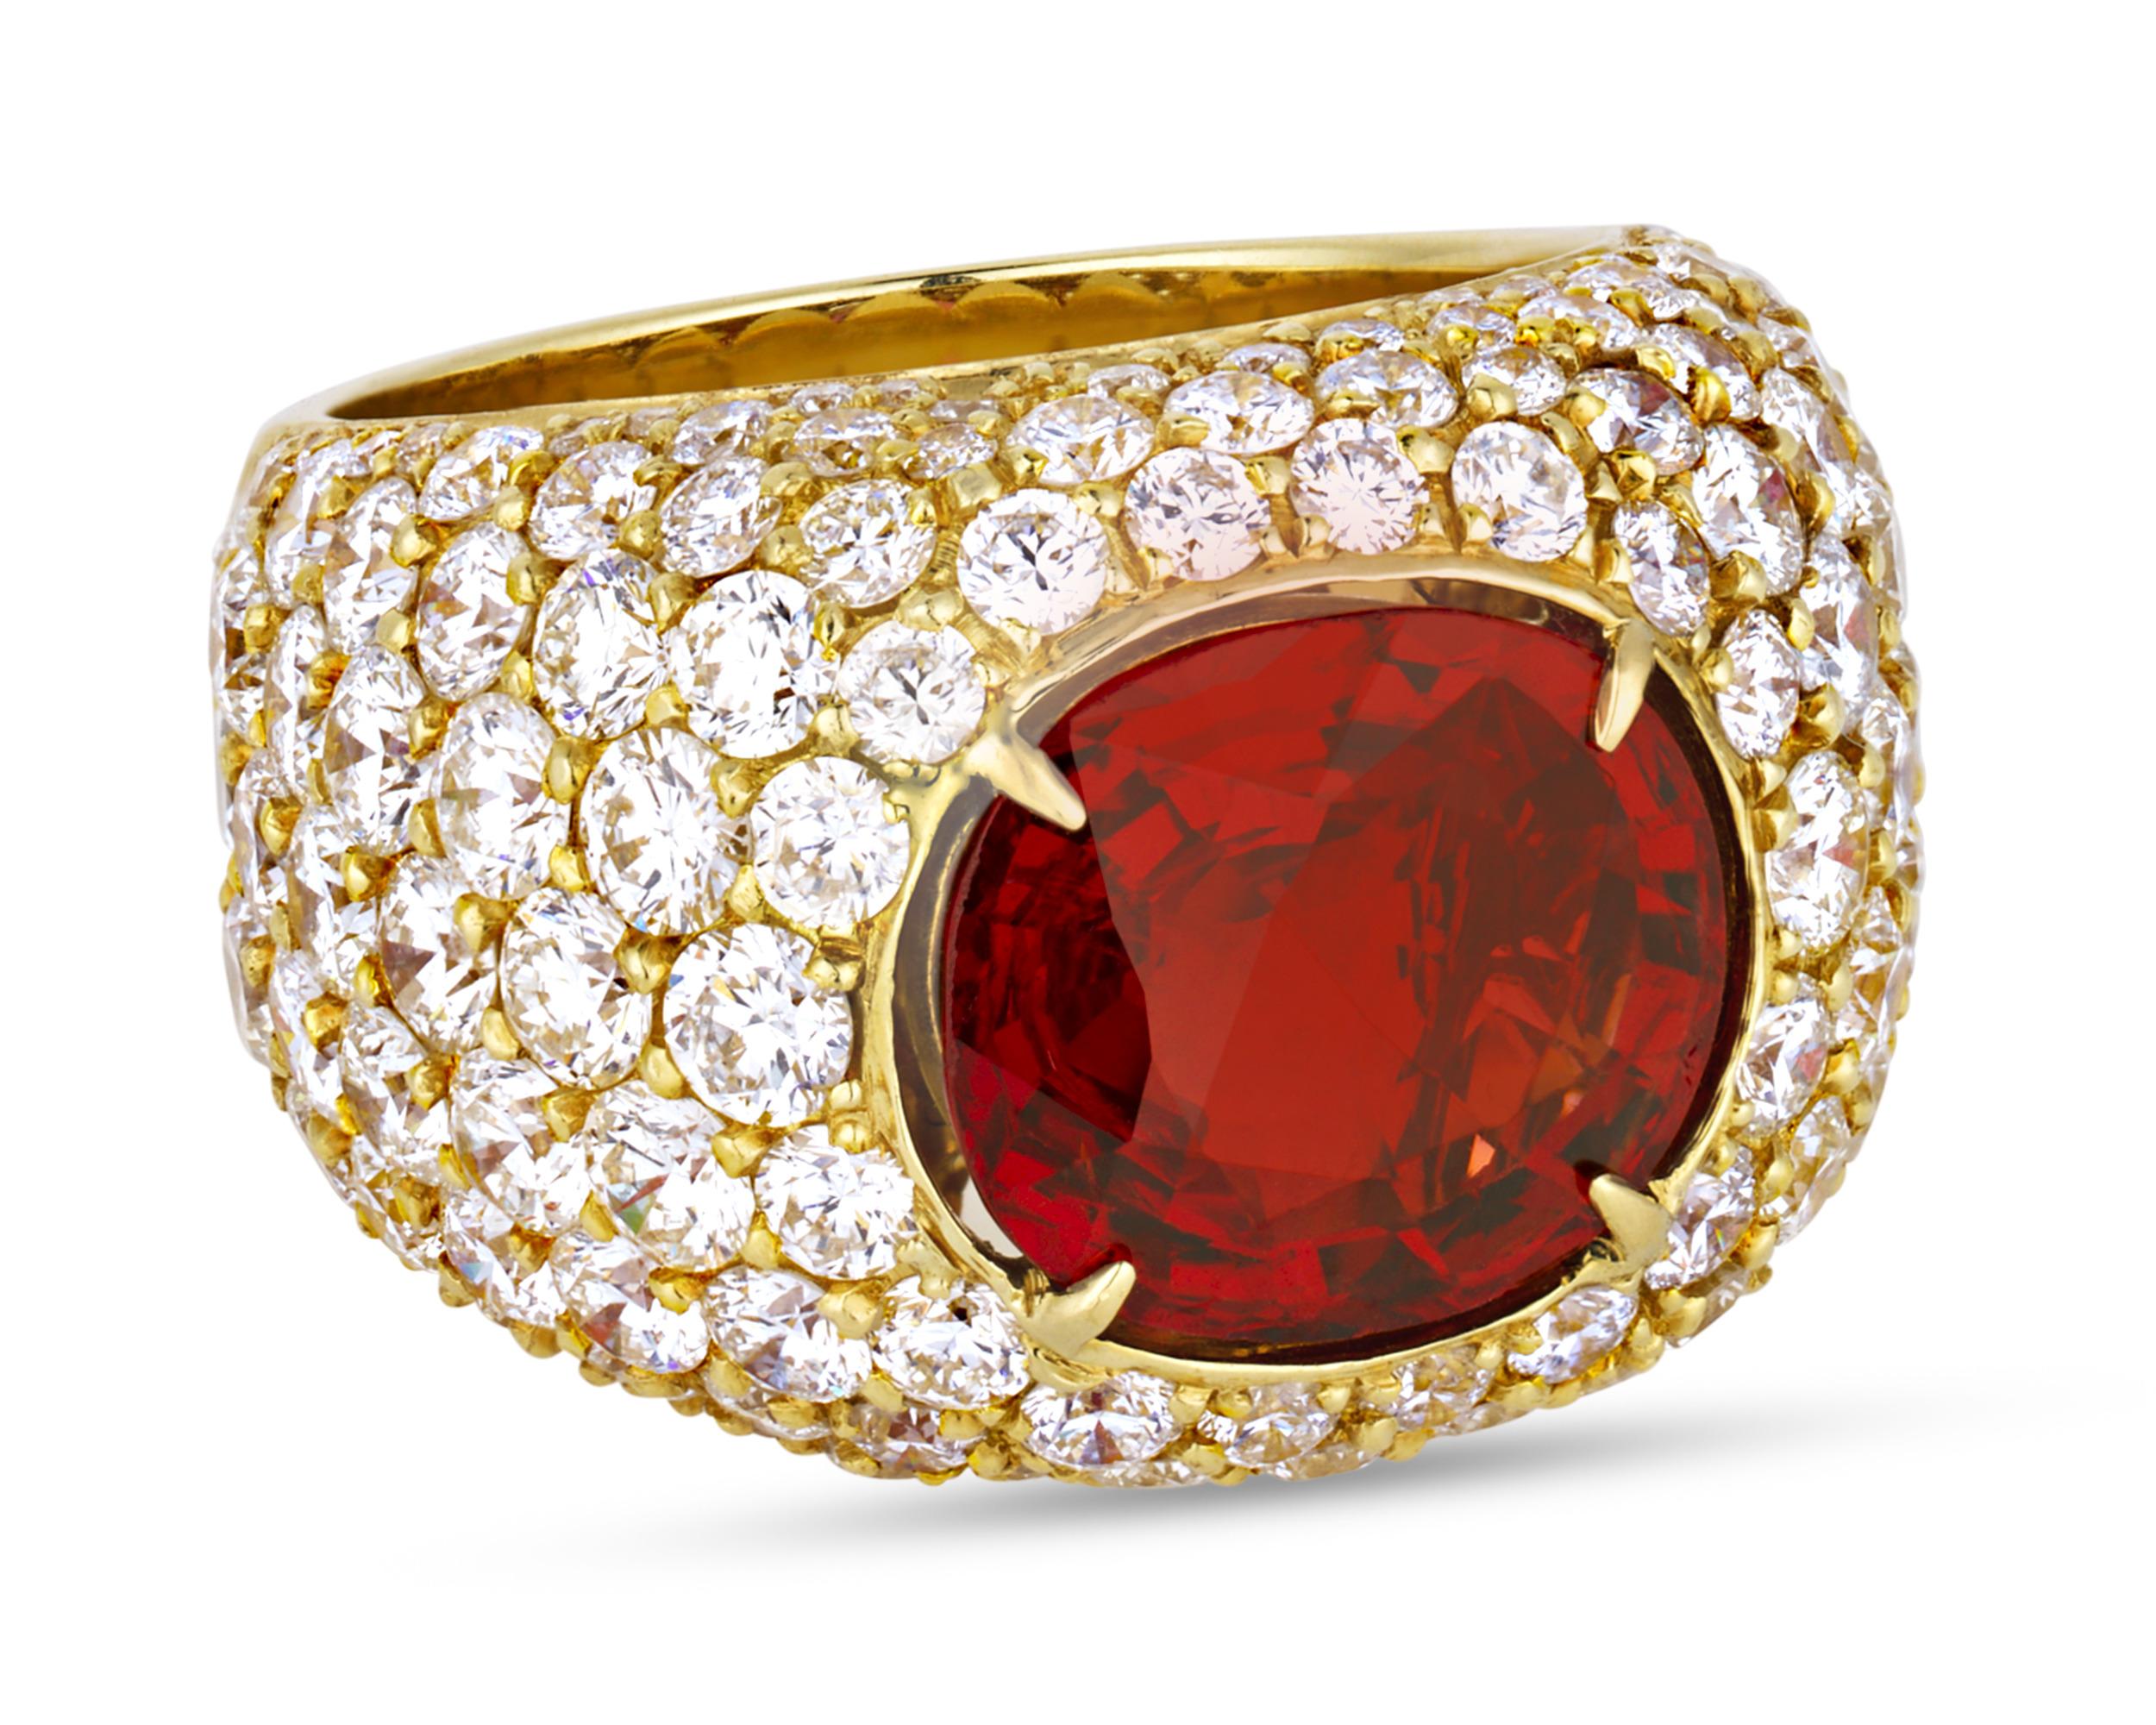 A fiery spinel weighing approximately 5.00 carats takes center stage in this stylish ring. Exhibiting a dramatic deep orange hue, this jewel is bezel set into a domed 18K yellow gold setting encrusted in brilliant white diamond accents.